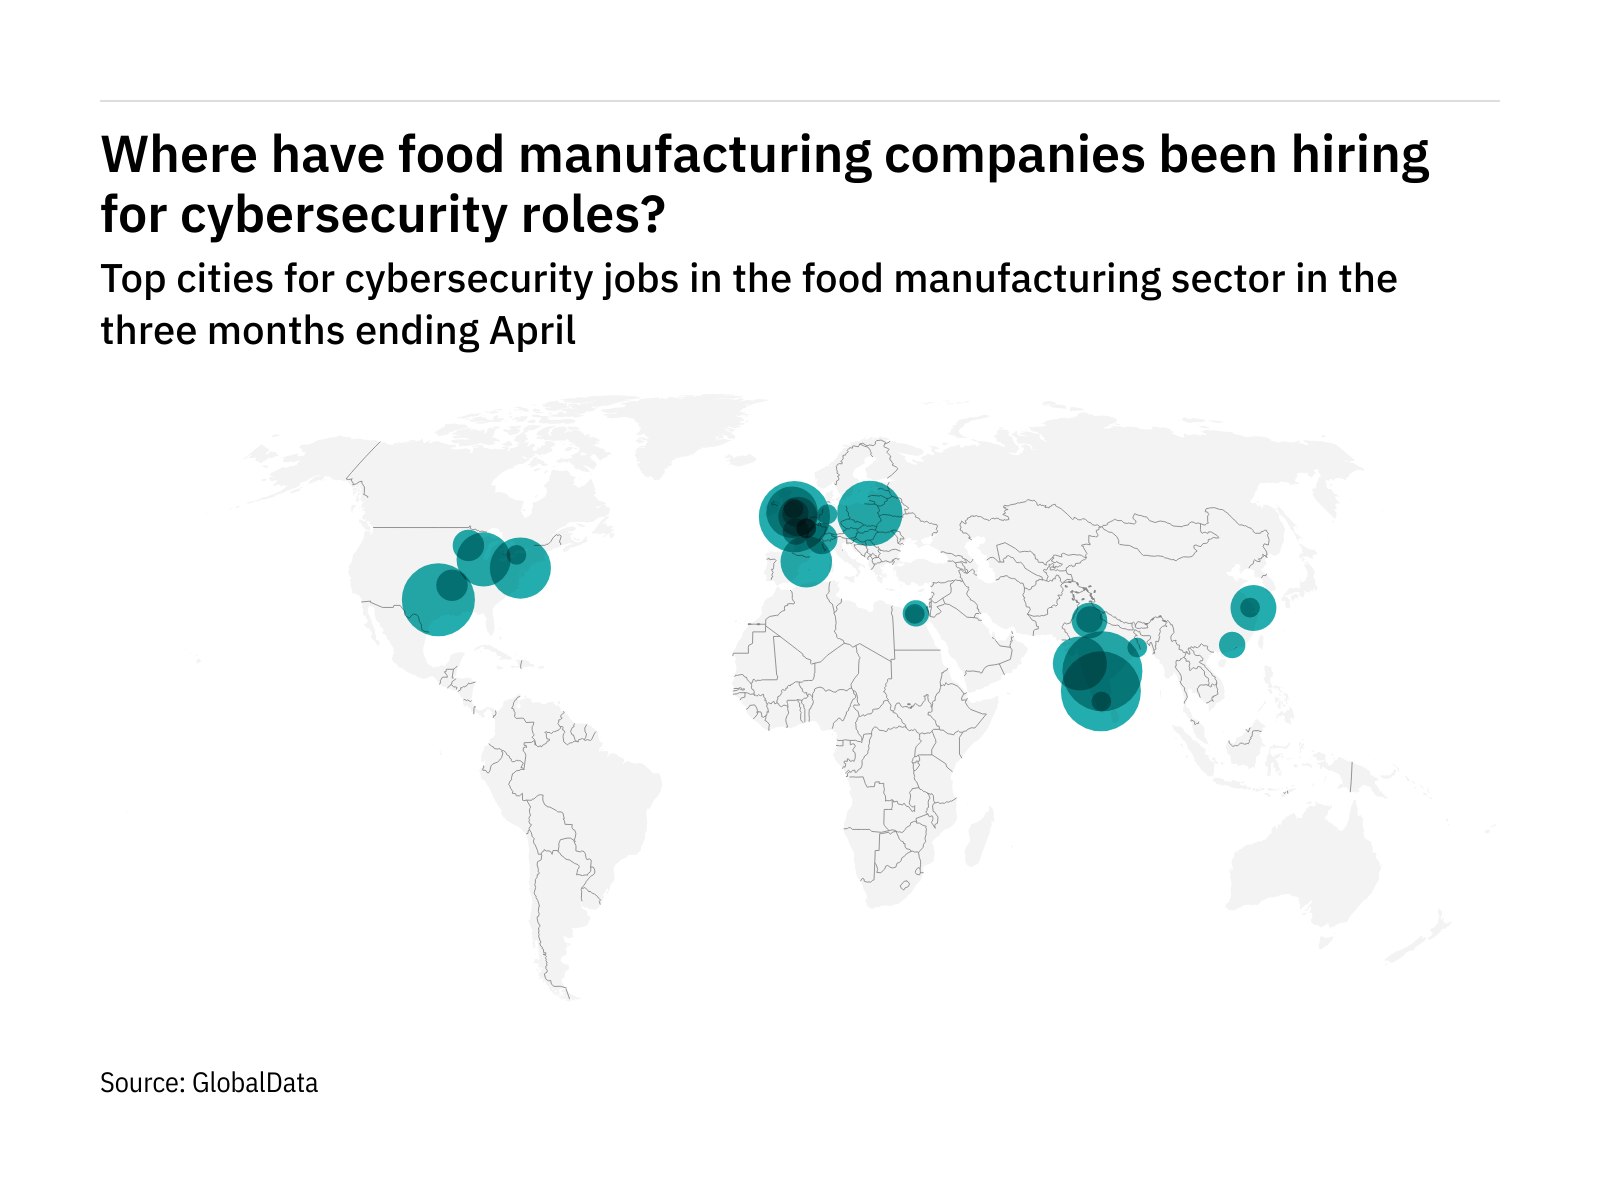 Asia-Pacific sees hiring boom in food industry cybersecurity roles